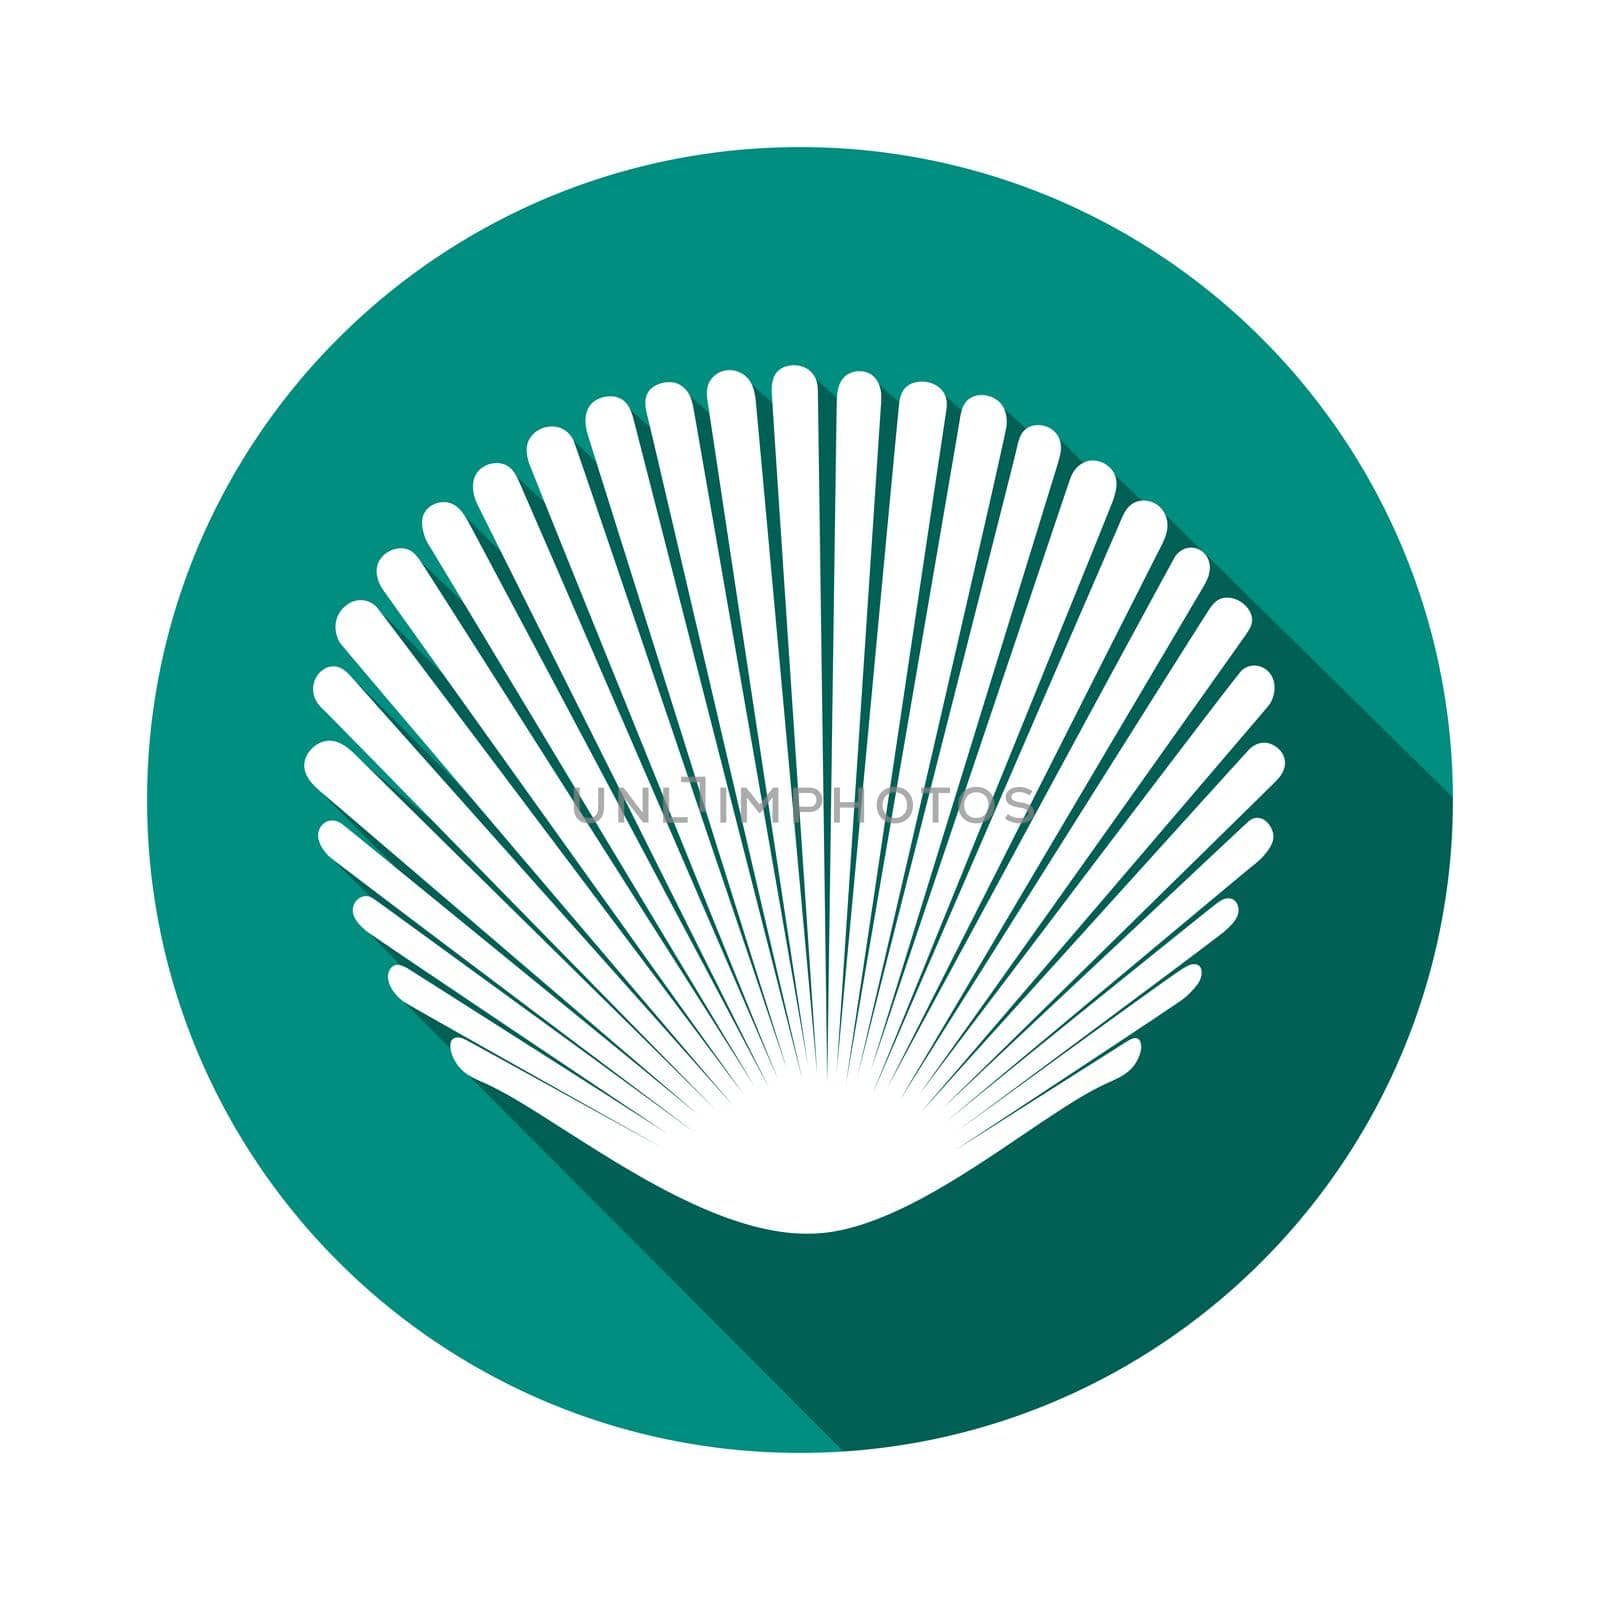 White seashell on turquoise round background. Flat icon with long shadow. Raster version.